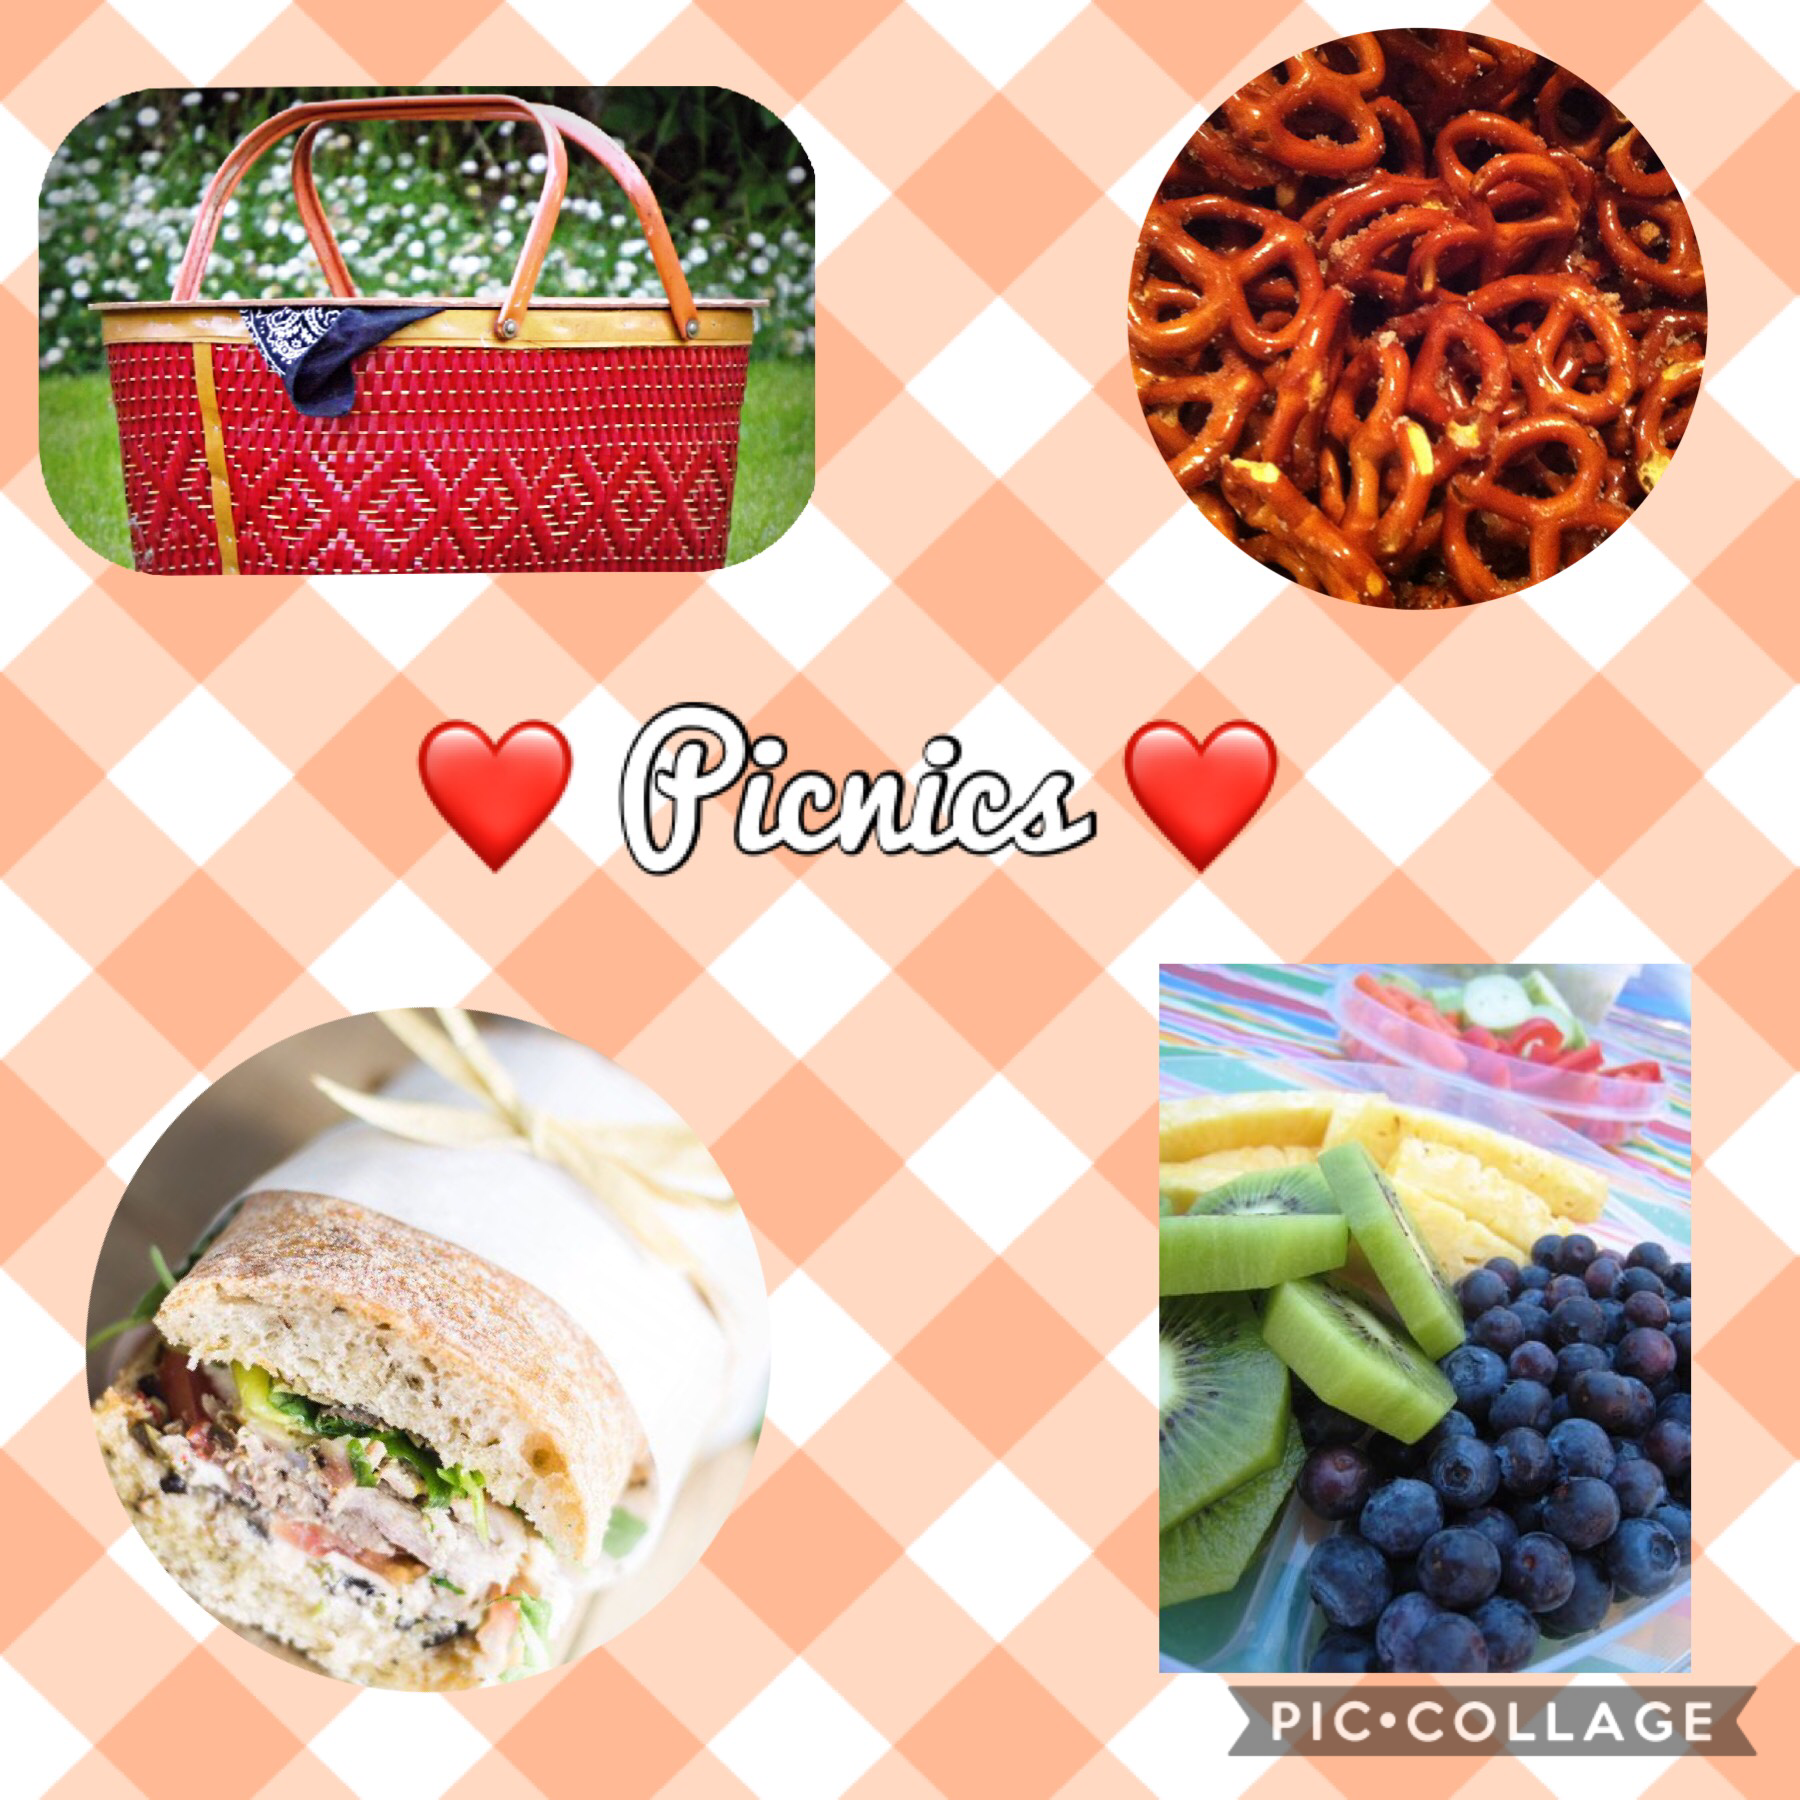 Have you ever been on a picnic? Leave a comment! 